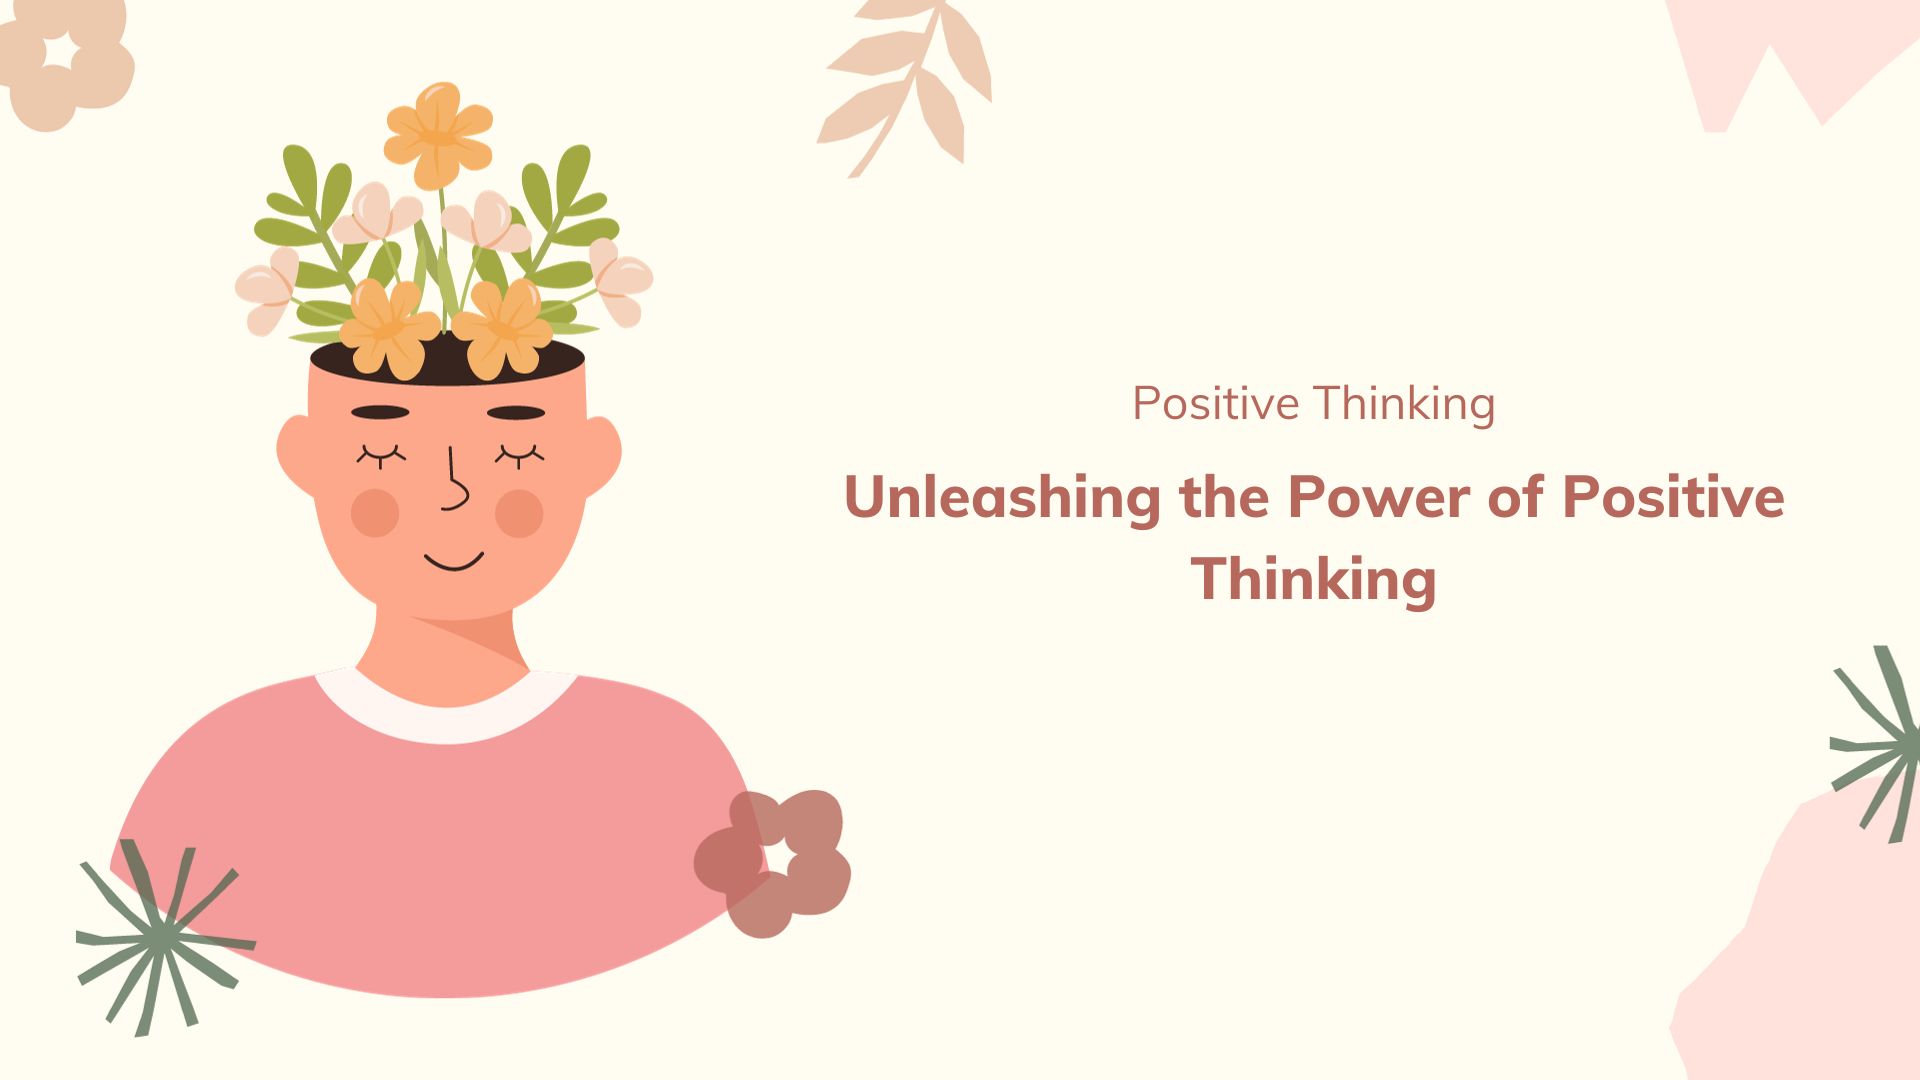 Unleashing the Power of Positive Thinking